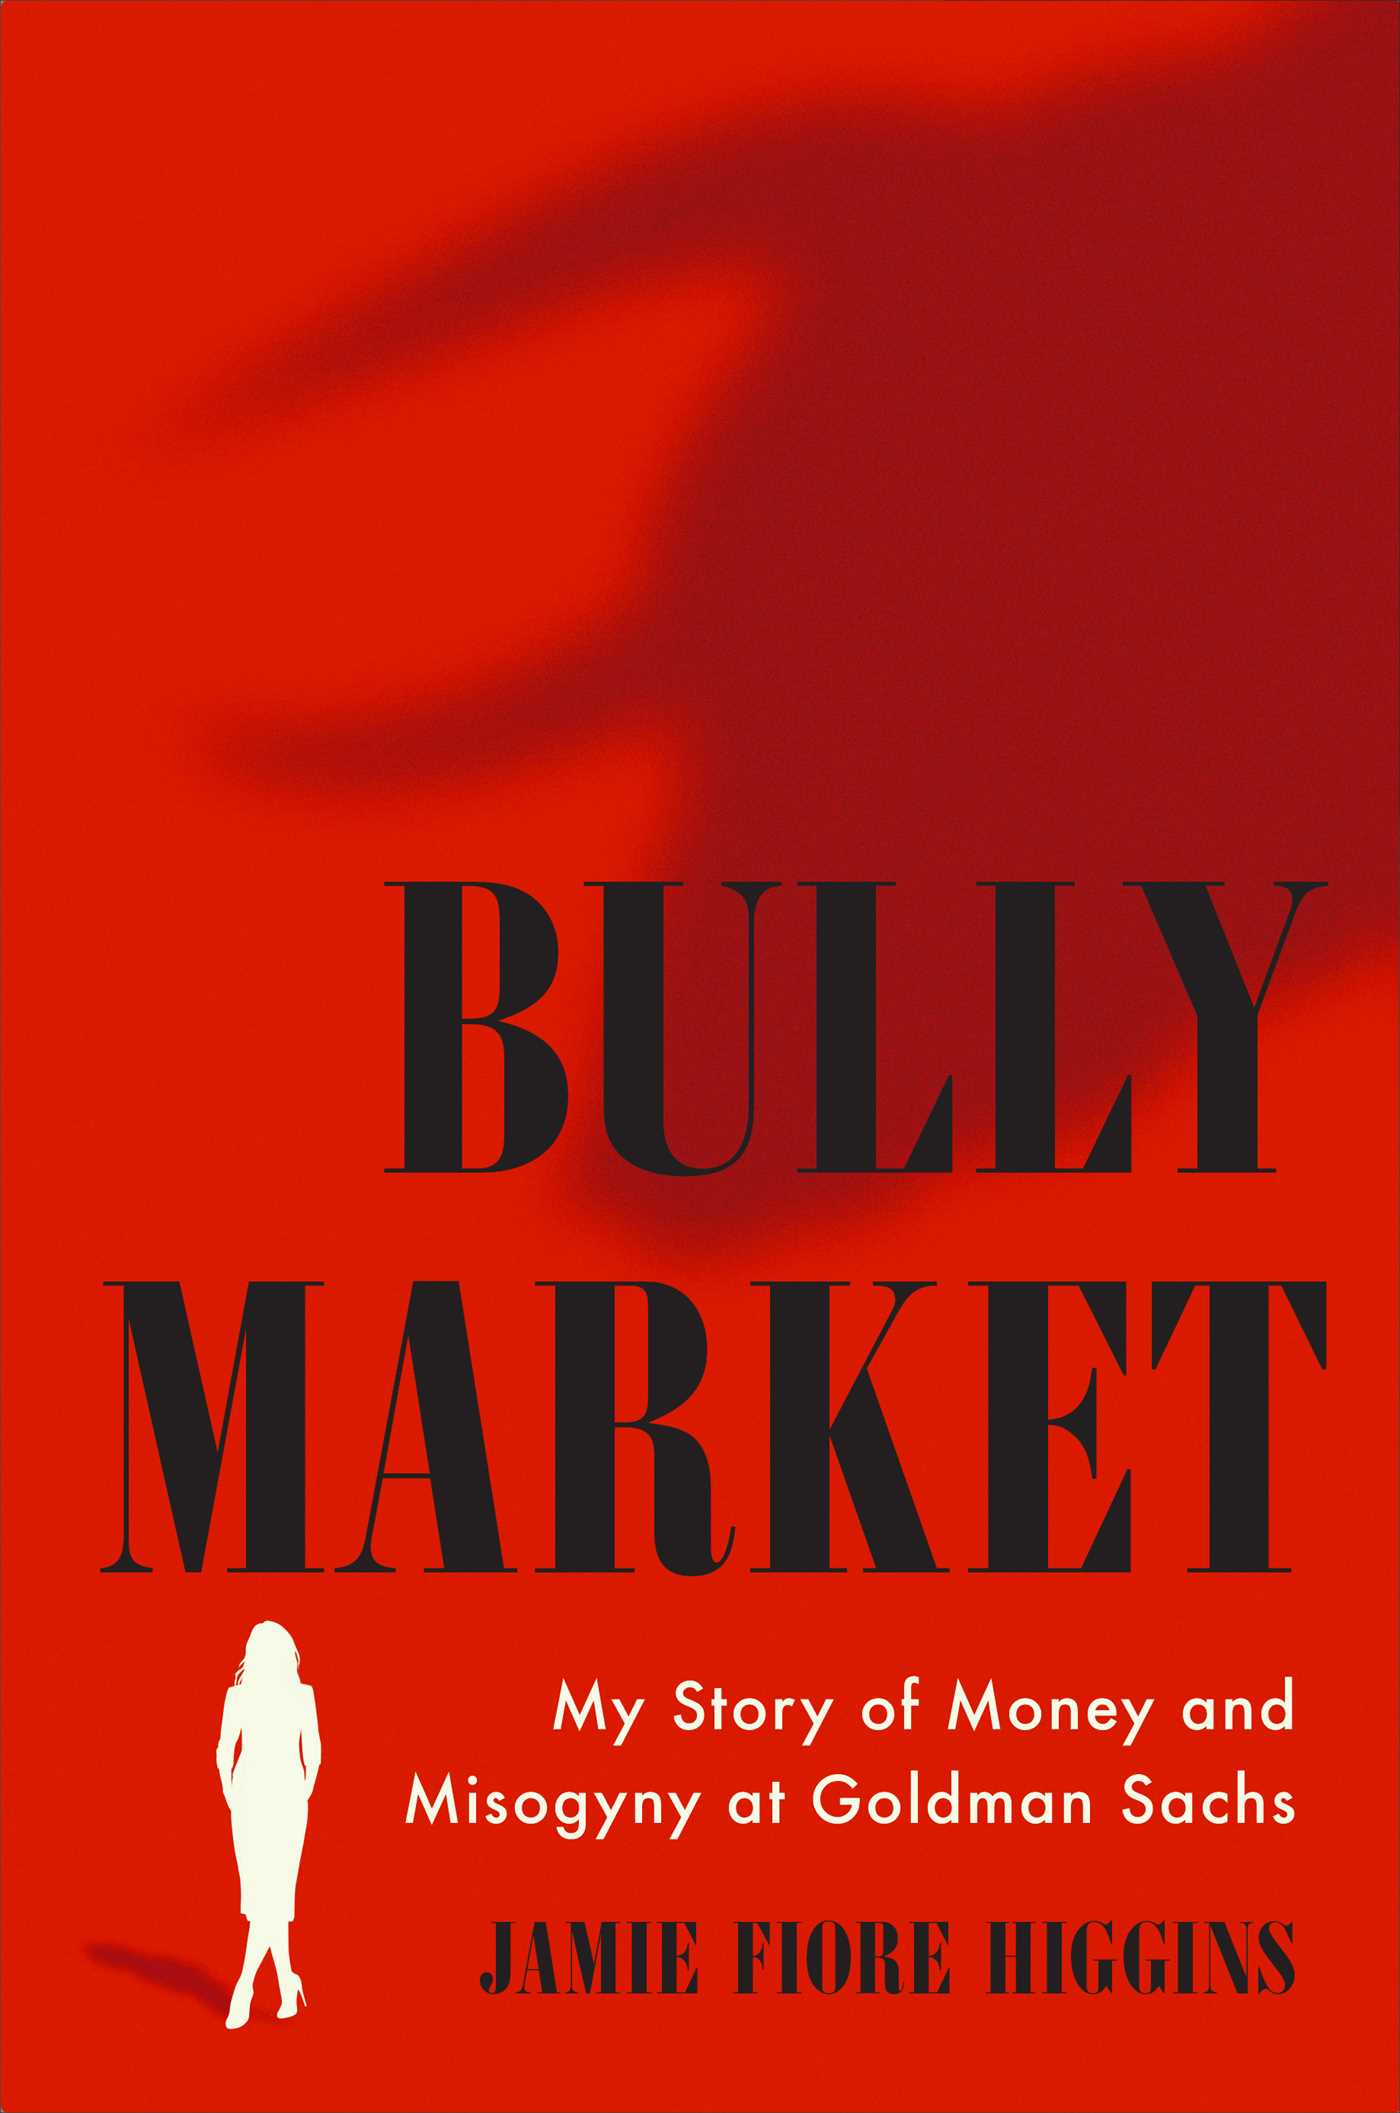 Bully Market is a ‘rare, riveting insider’s account’ of discrimination on Wall Street